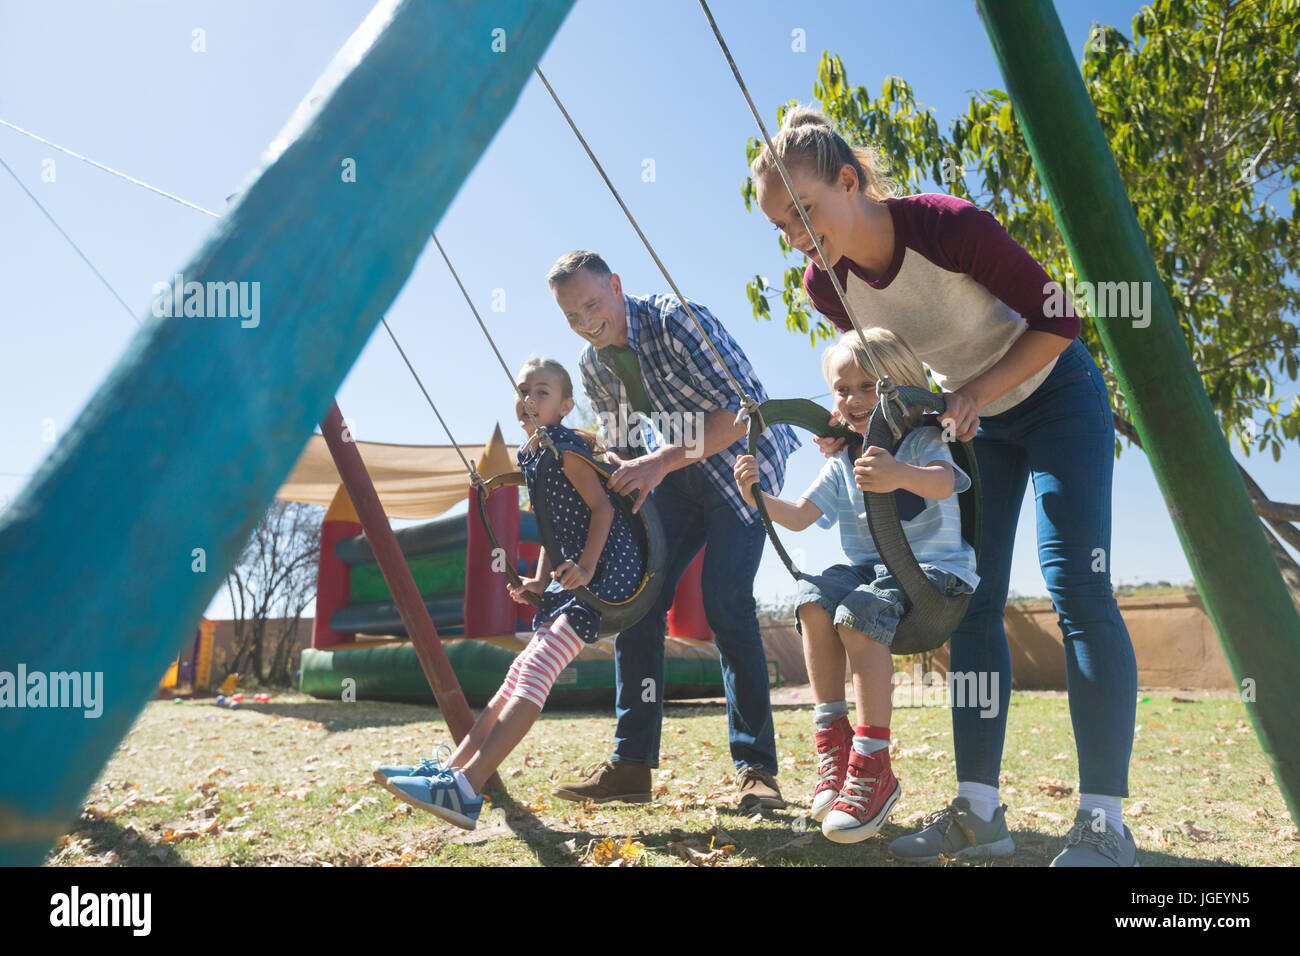 Happy parents swinging children at playground during sunny day Stock Photo